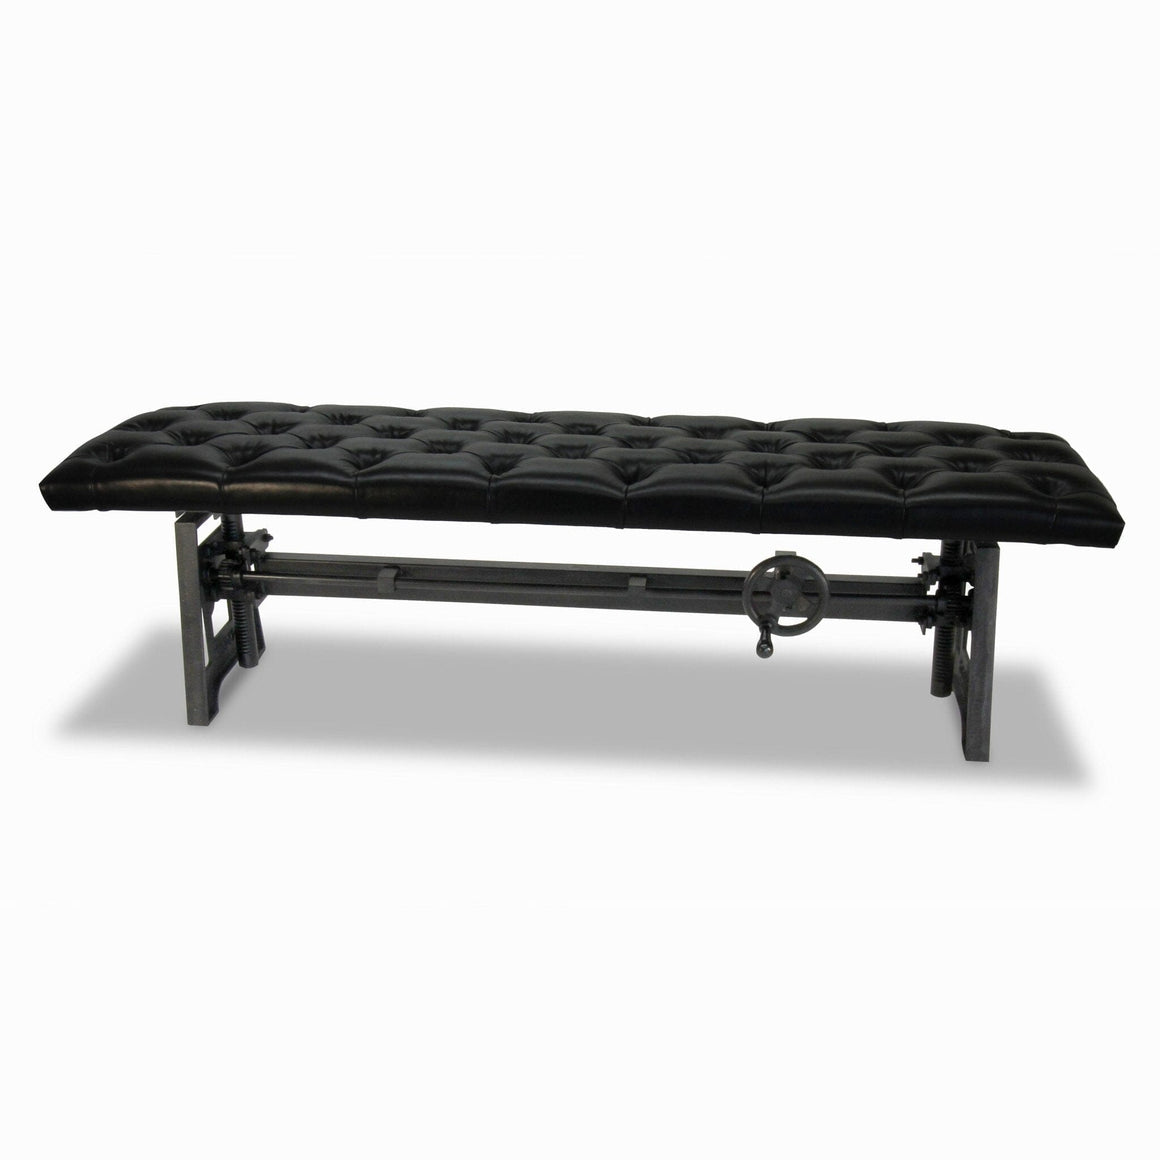 Industrial Dining Bench Seat - Cast Iron Base - Adjustable Black Leather Top - Rustic Deco Incorporated